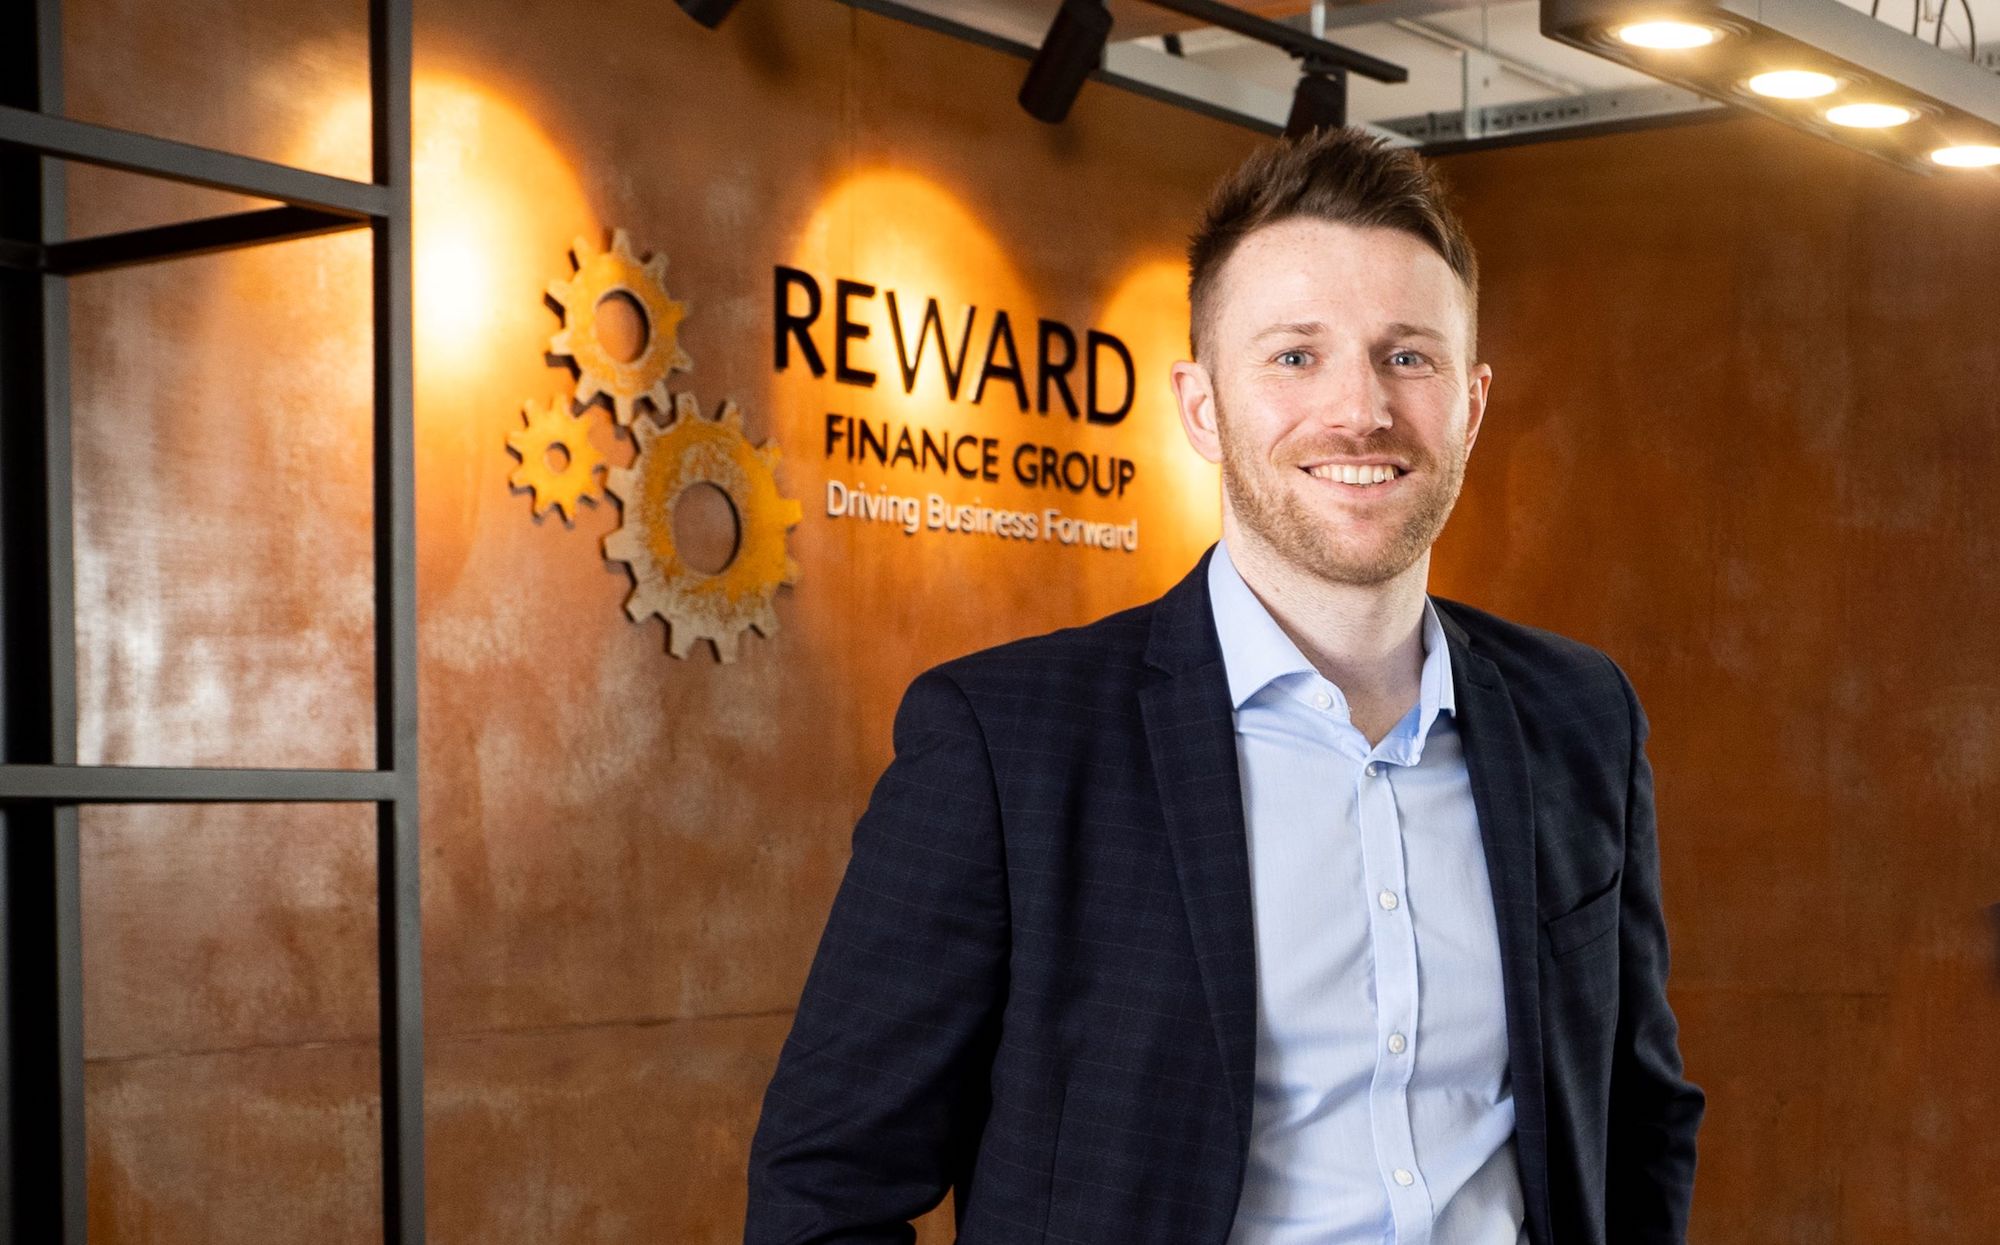 Reward Finance appoints Chris Ibbetson to lead client relationship operations in Scotland and beyond